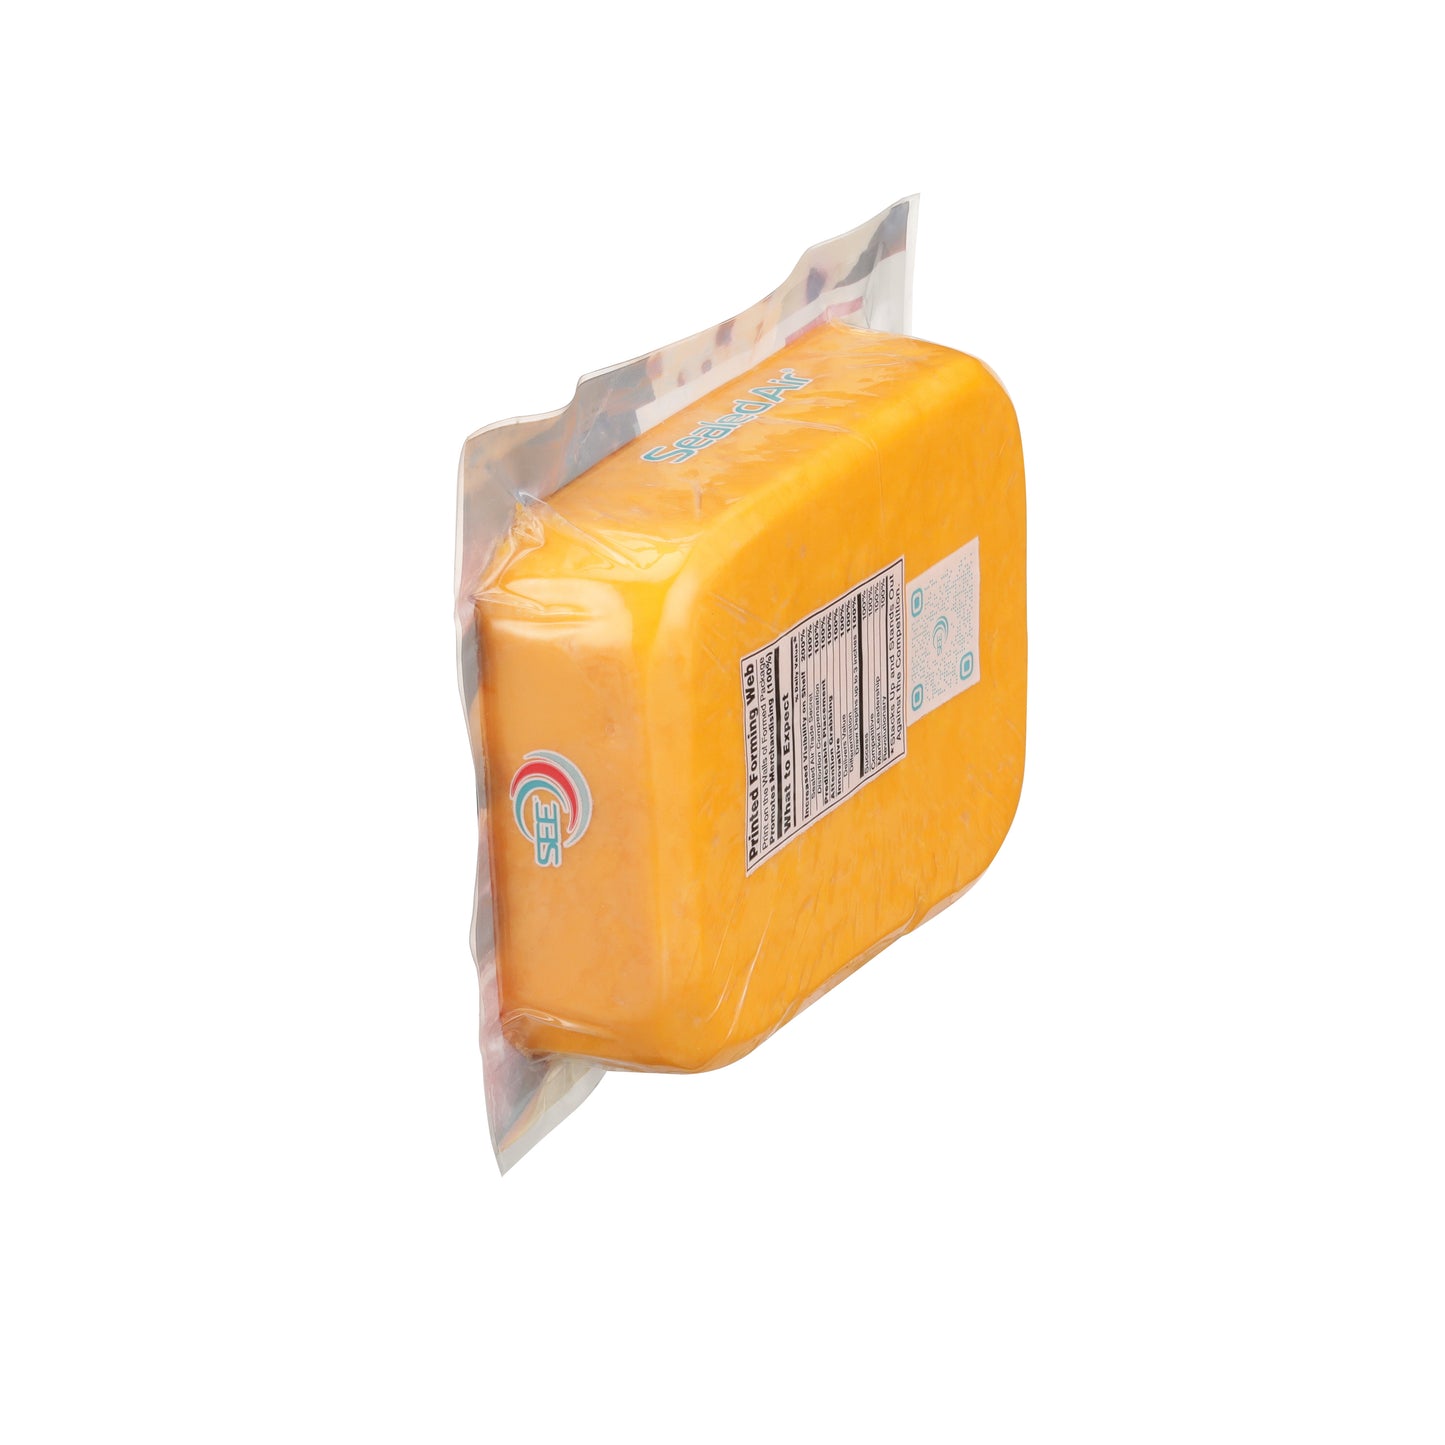 CRYOVAC® Brand T-Series Flexible Rollstock for Cheese